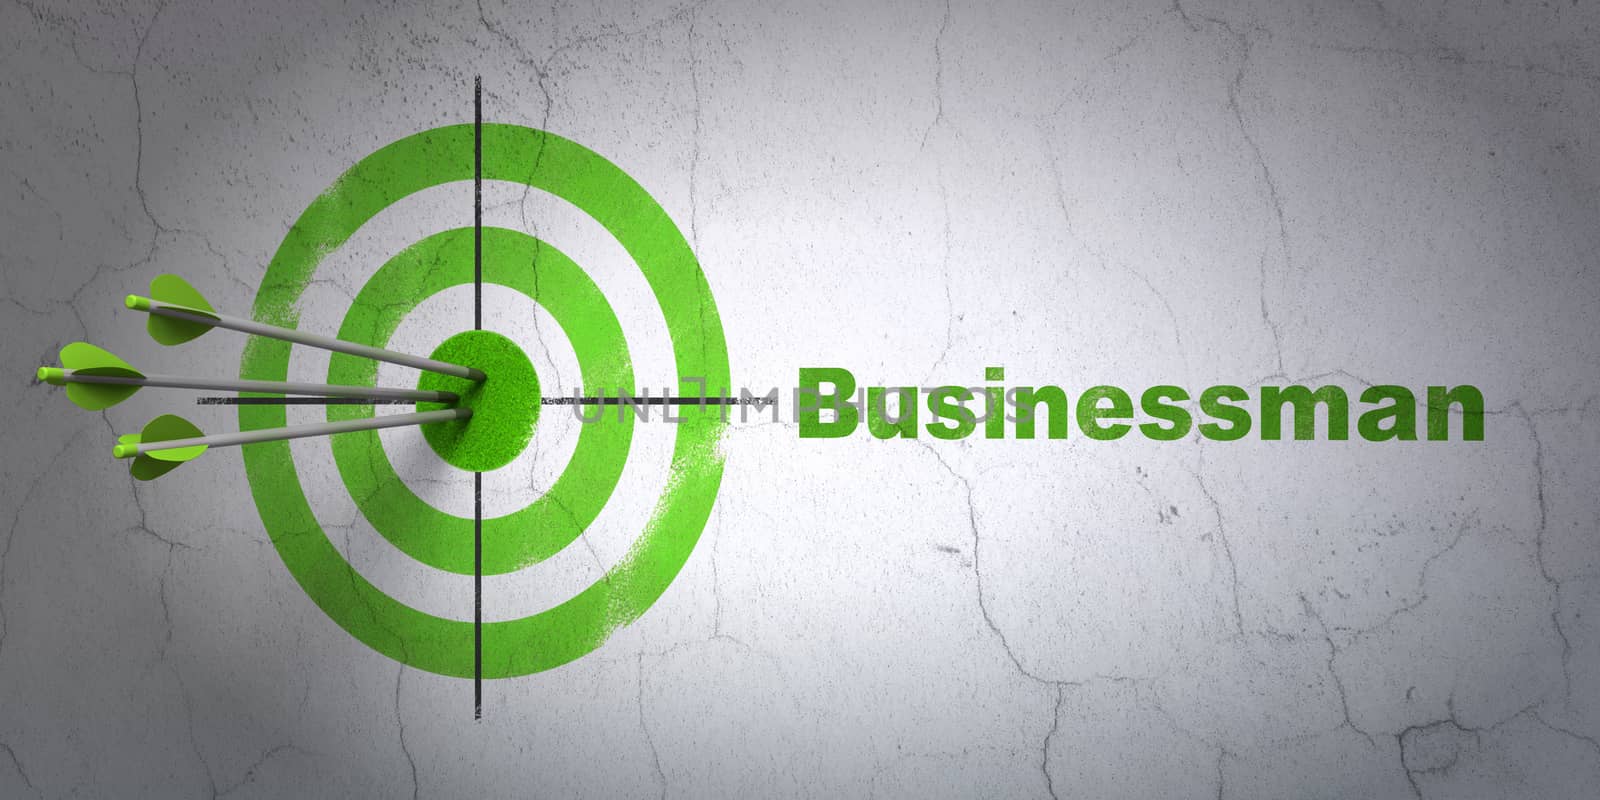 Success business concept: arrows hitting the center of target, Green Businessman on wall background, 3D rendering